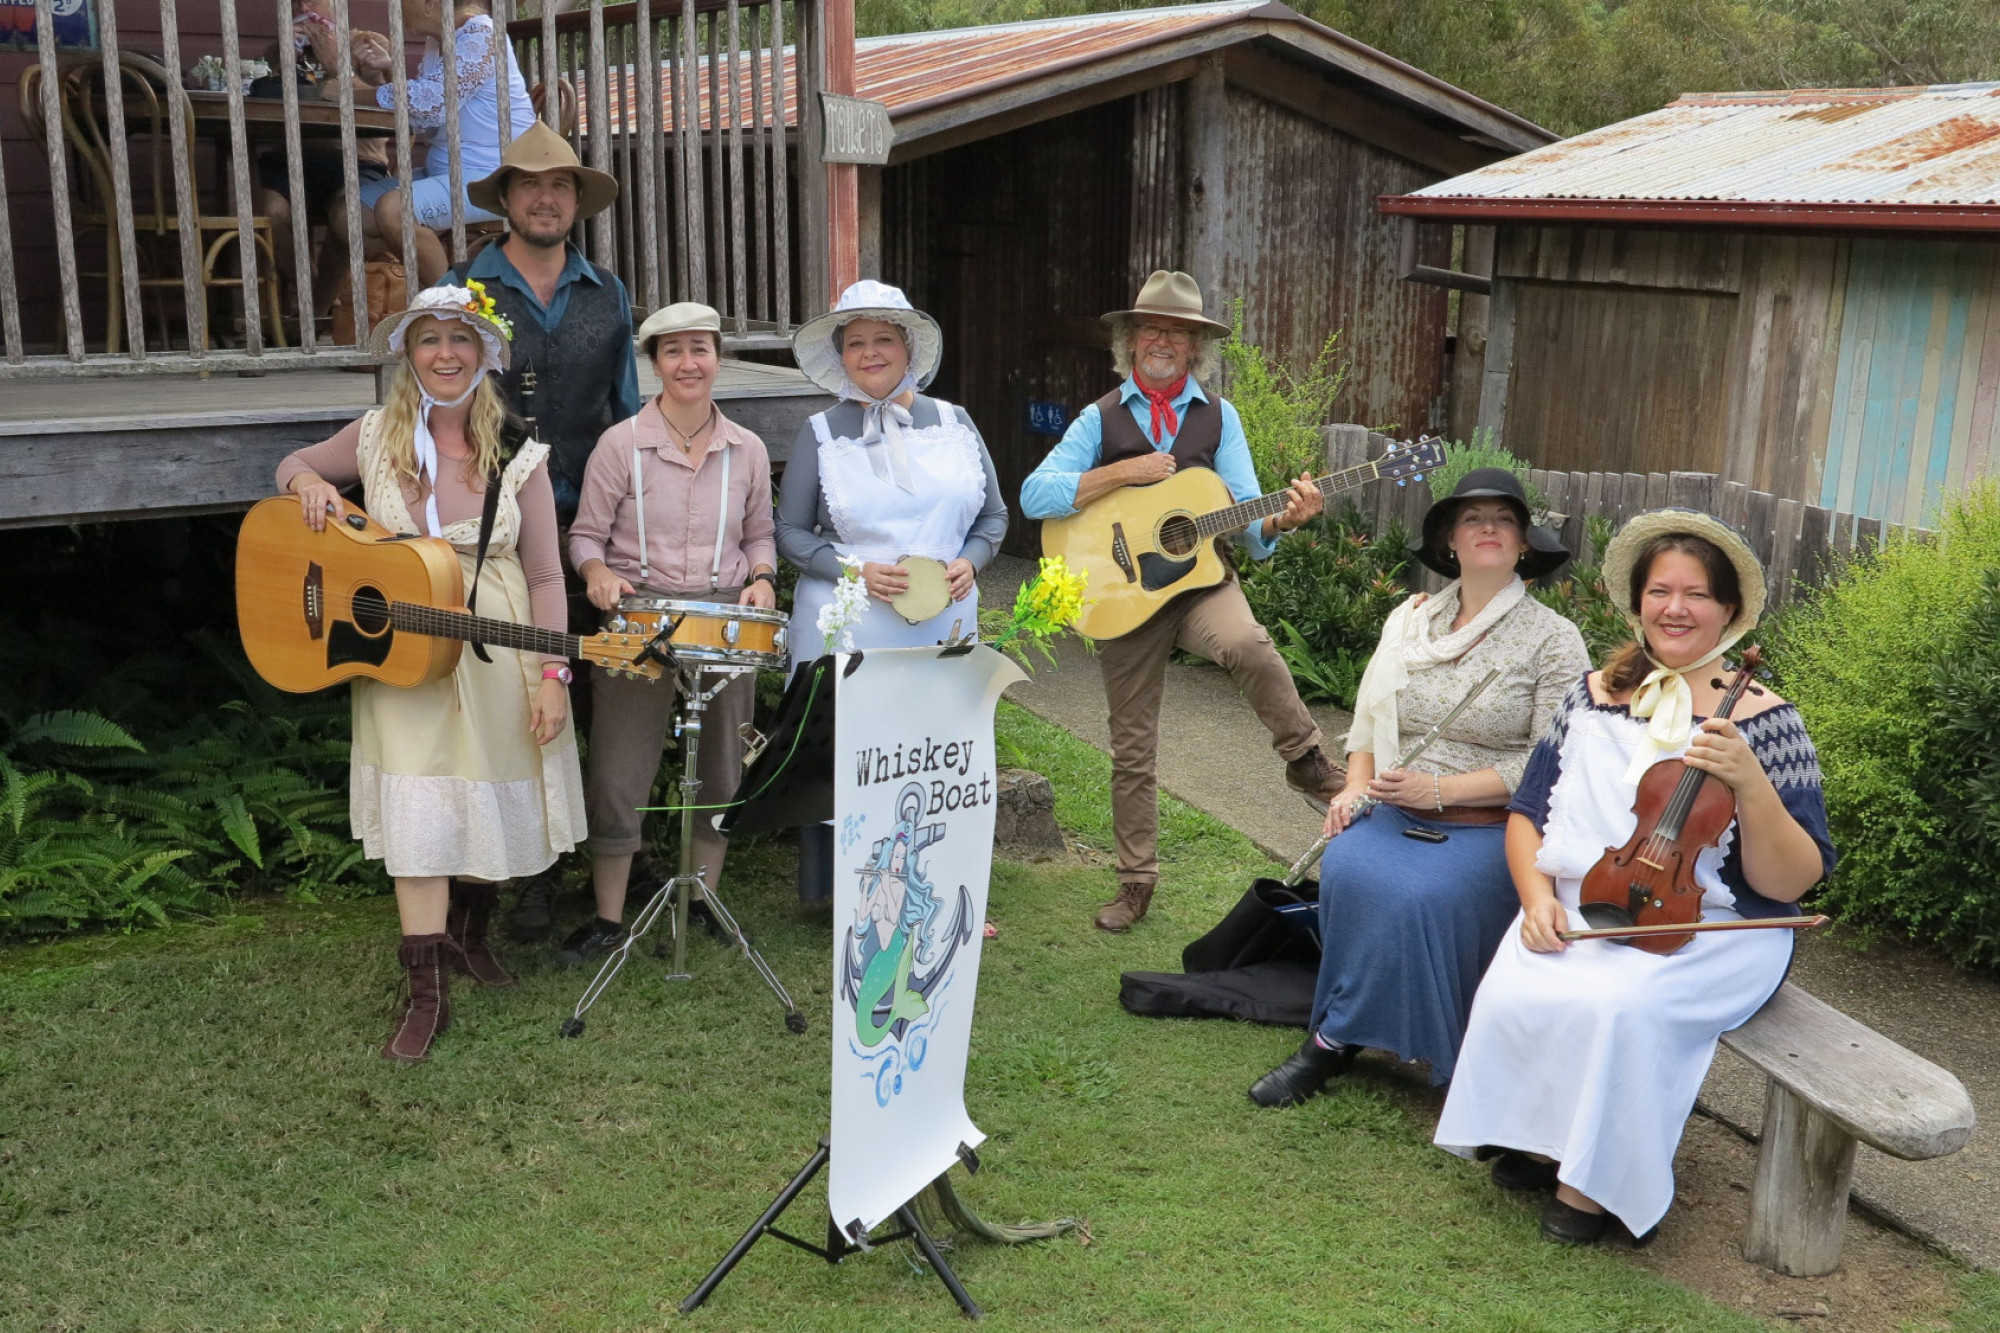 Herberton's historical village will come alive for its annual Pioneer weekend.